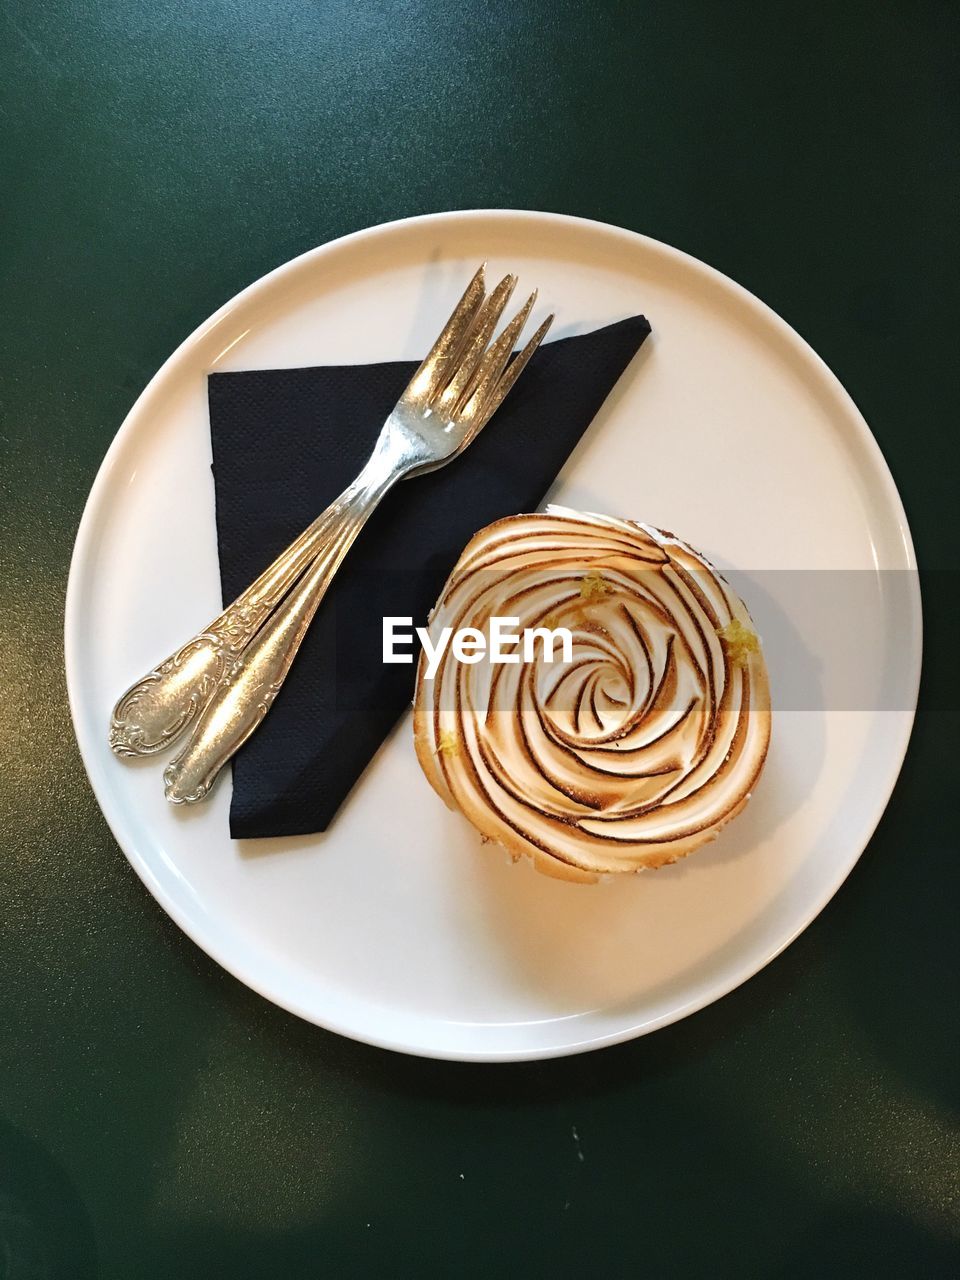 High angle view of cake served in plate on table